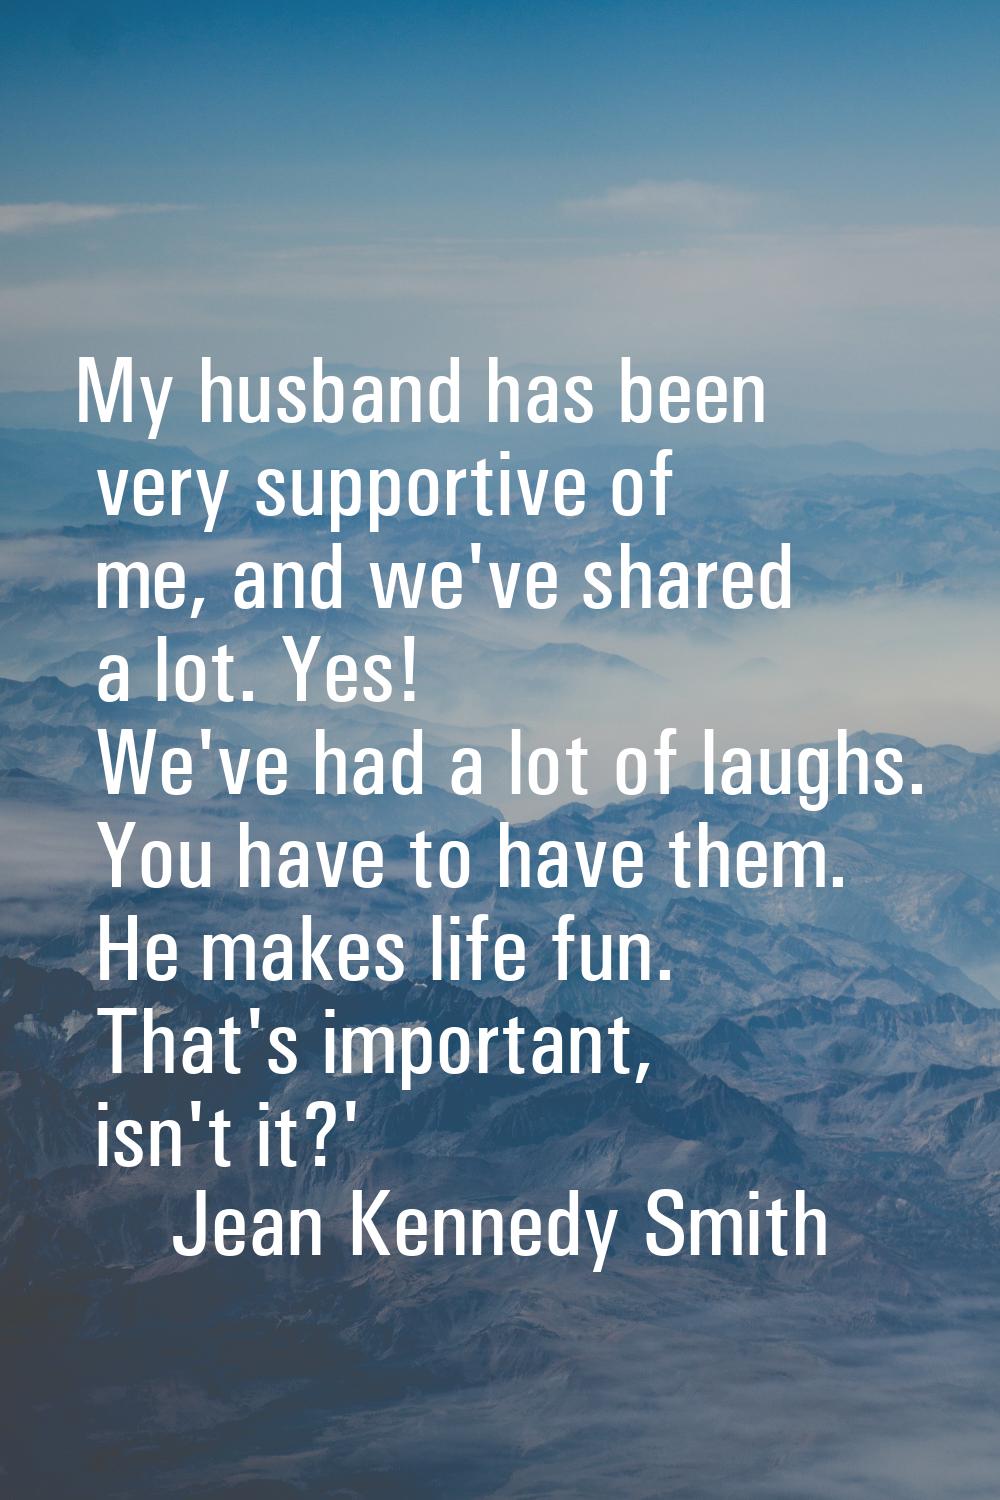 My husband has been very supportive of me, and we've shared a lot. Yes! We've had a lot of laughs. 